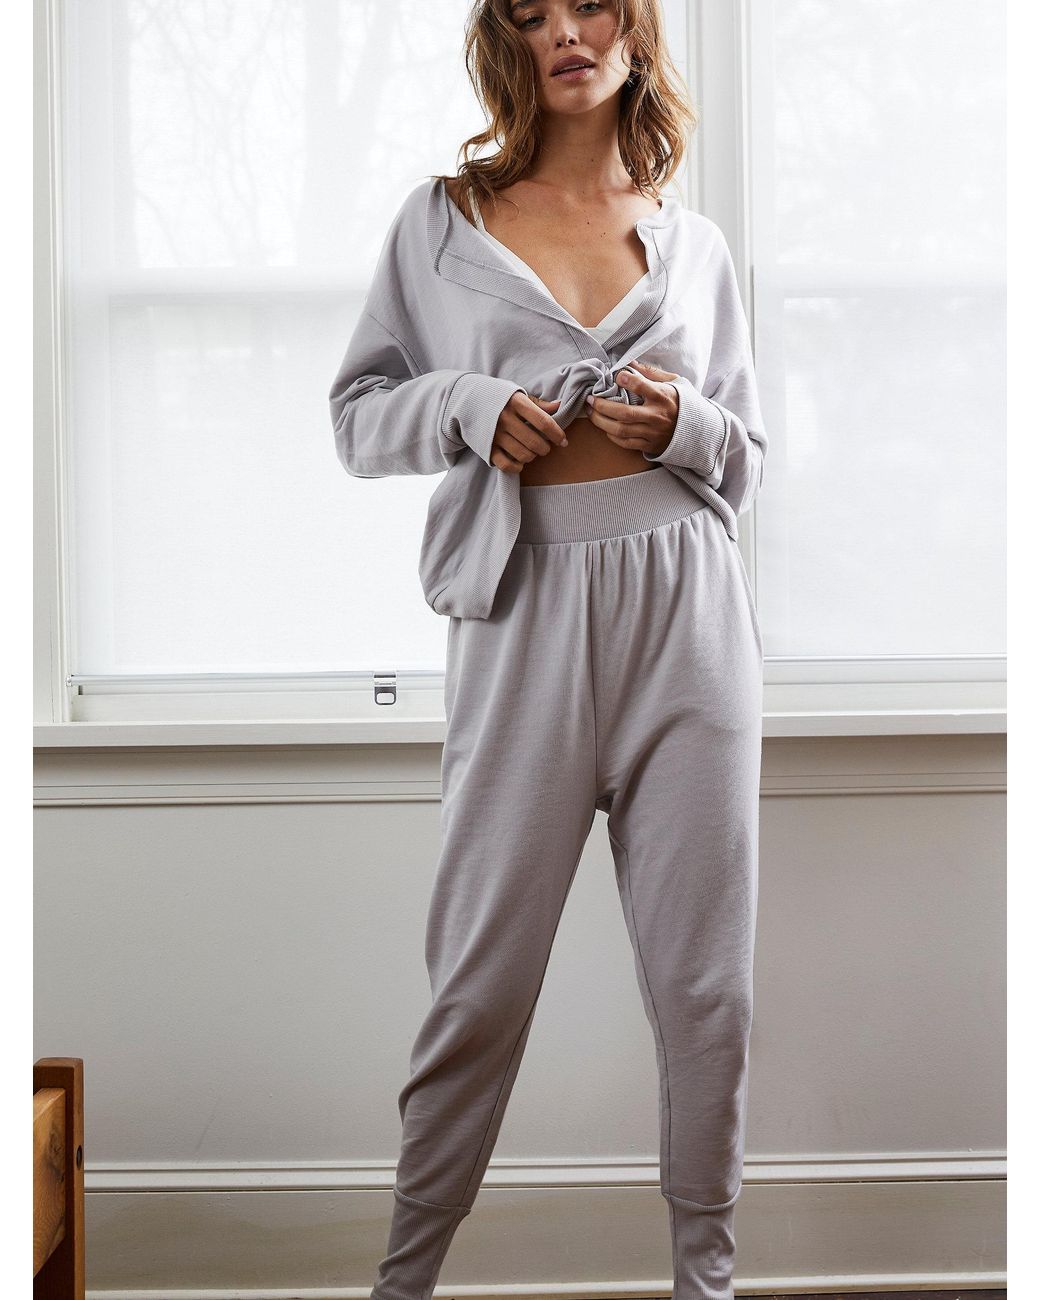 Free People Cozy Cool Girl Lounge Set in Sterling (Gray) - Lyst